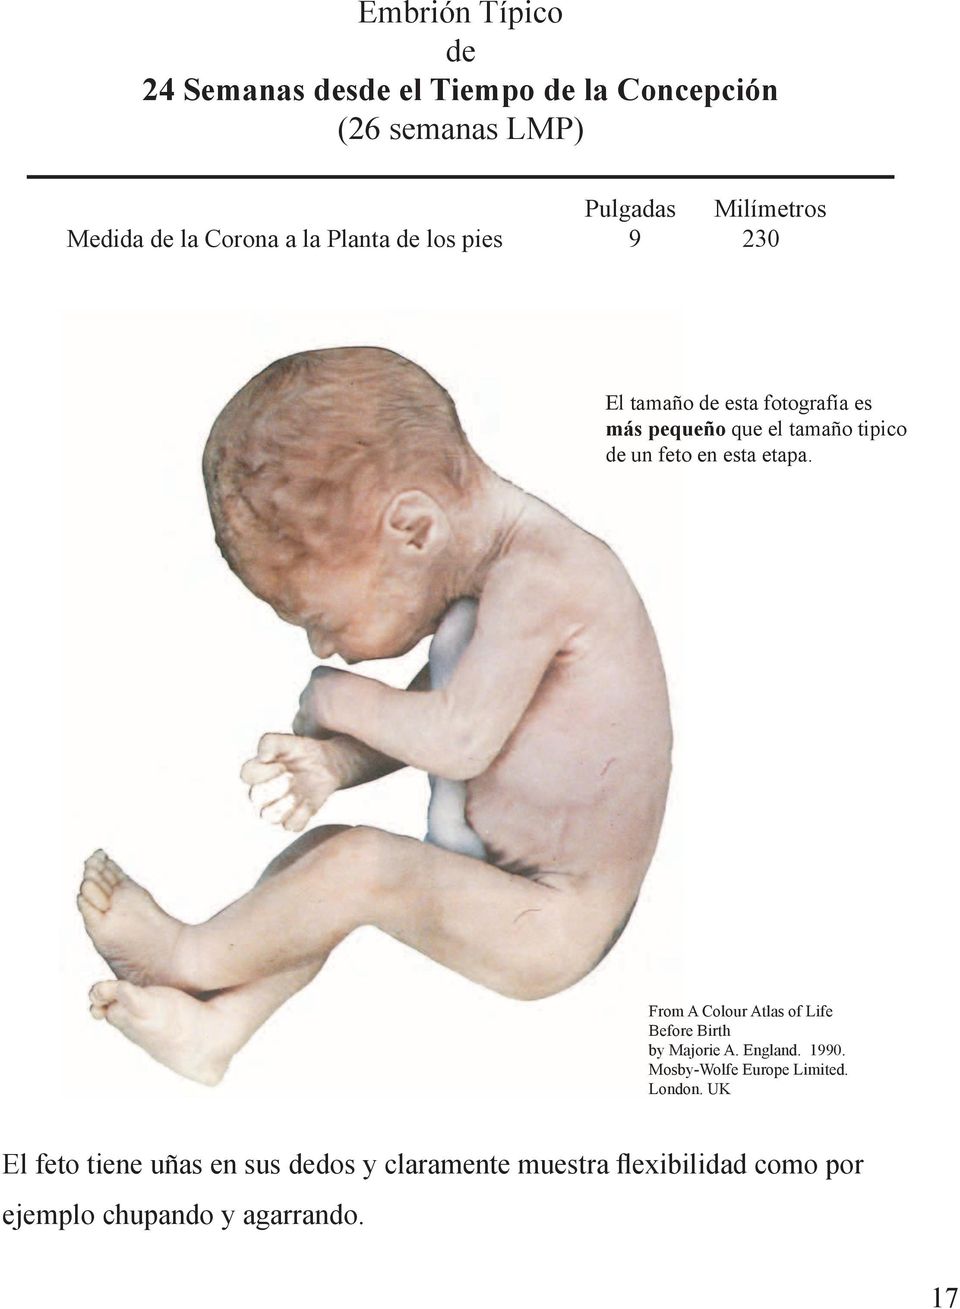 en esta etapa. From A Colour Atlas of Life Before Birth by Majorie A. England. 1990. Mosby-Wolfe Europe Limited.